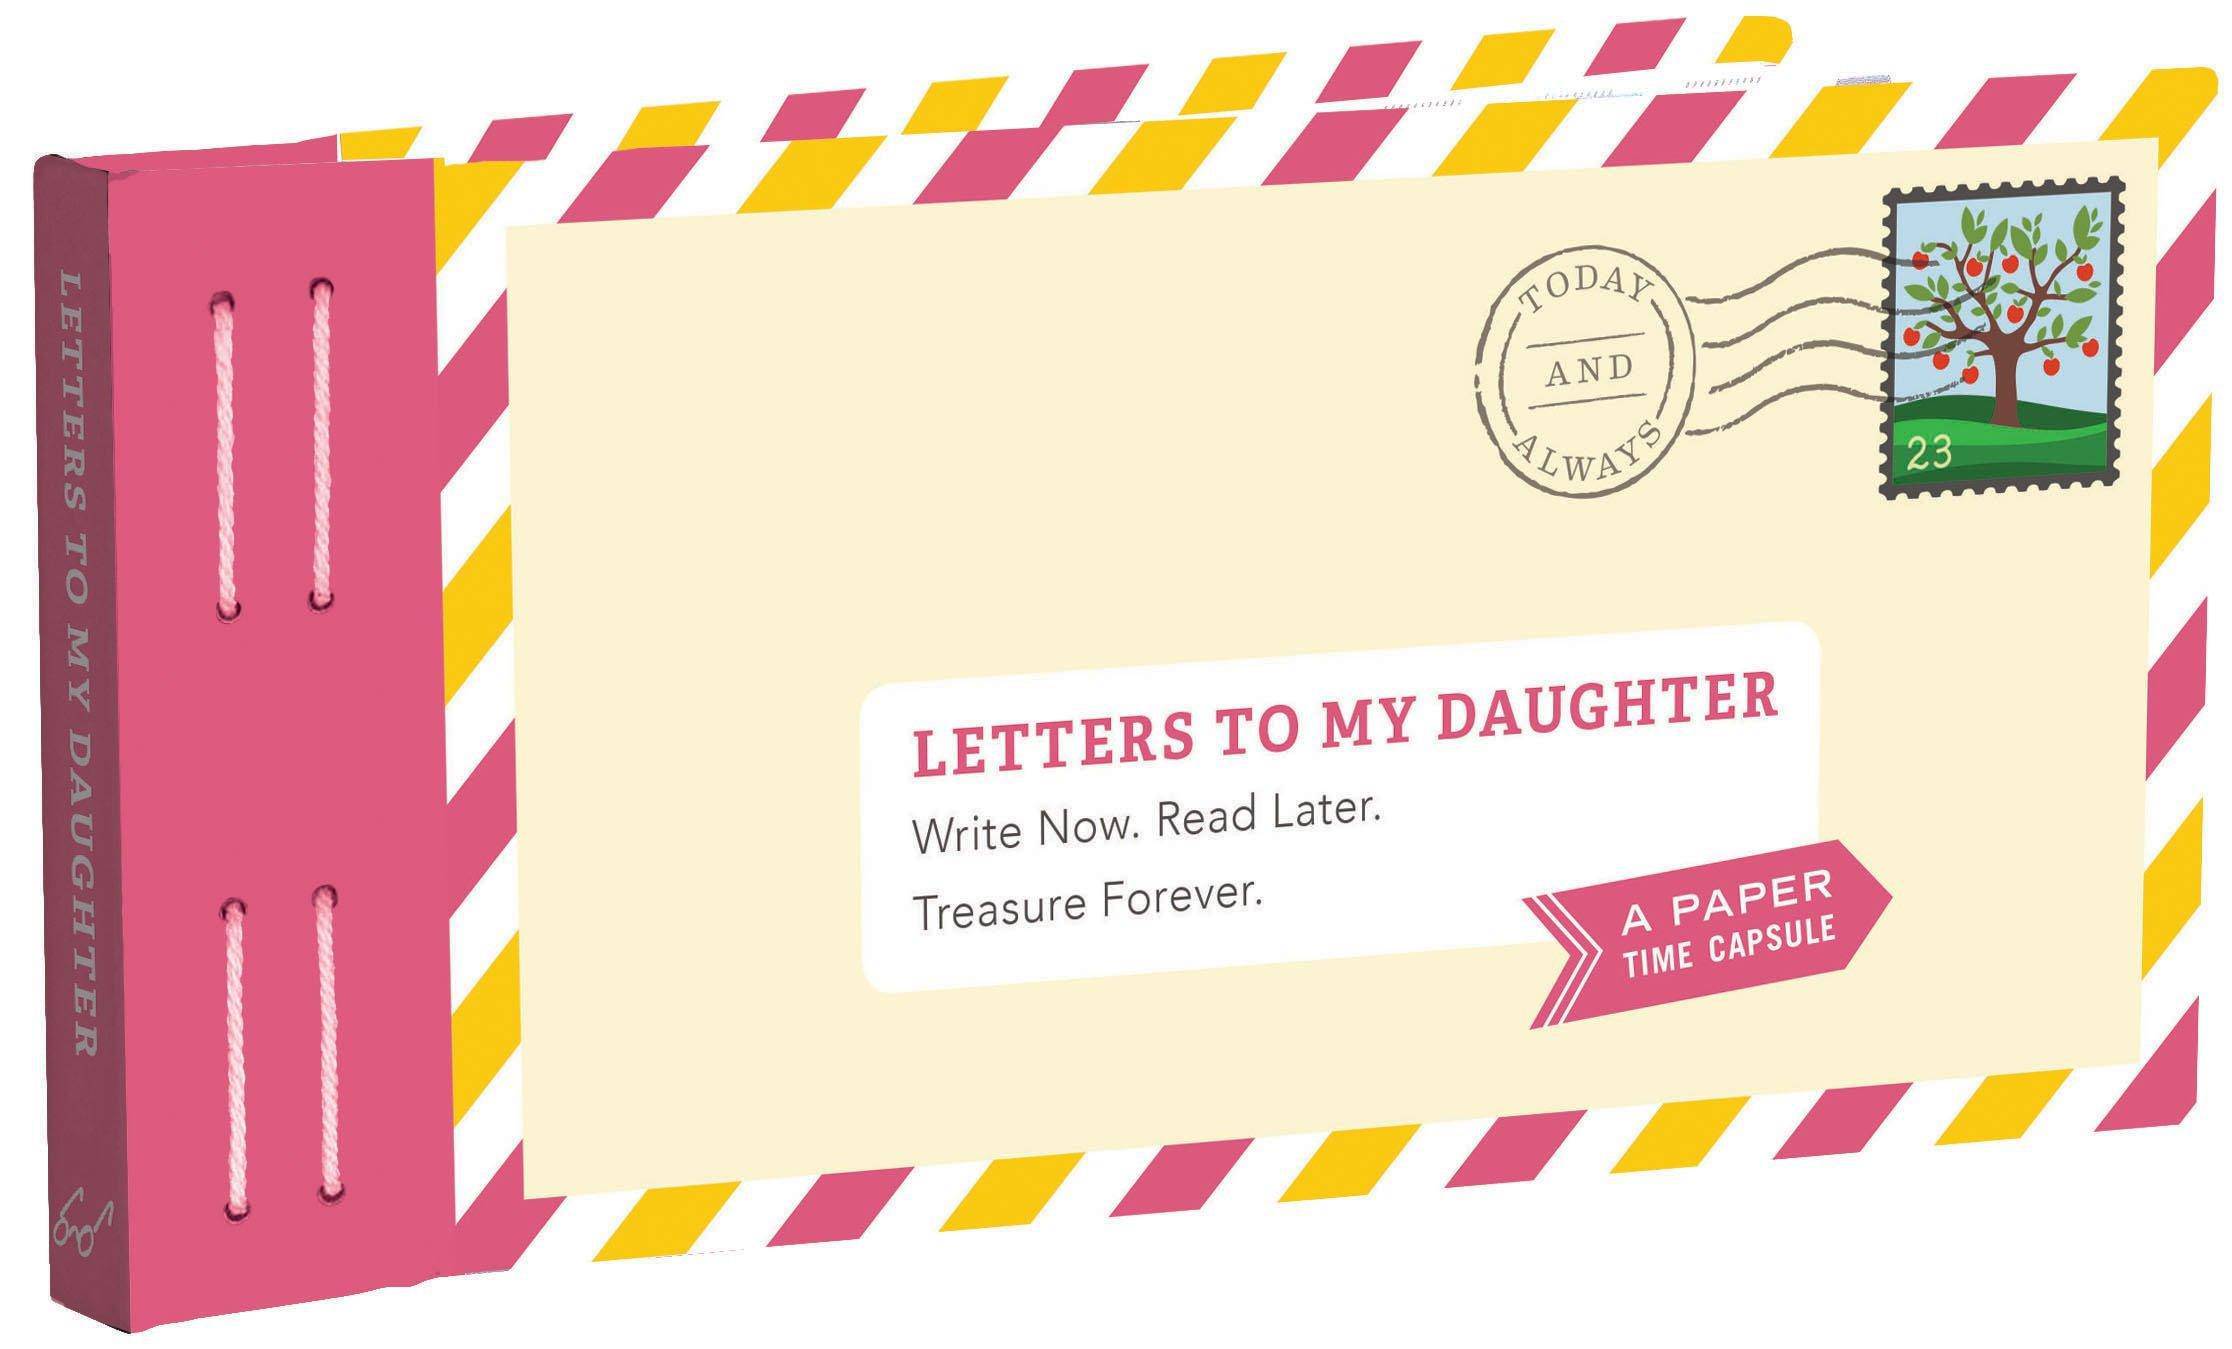 Letters To My Daughter - SureShot Books Publishing LLC